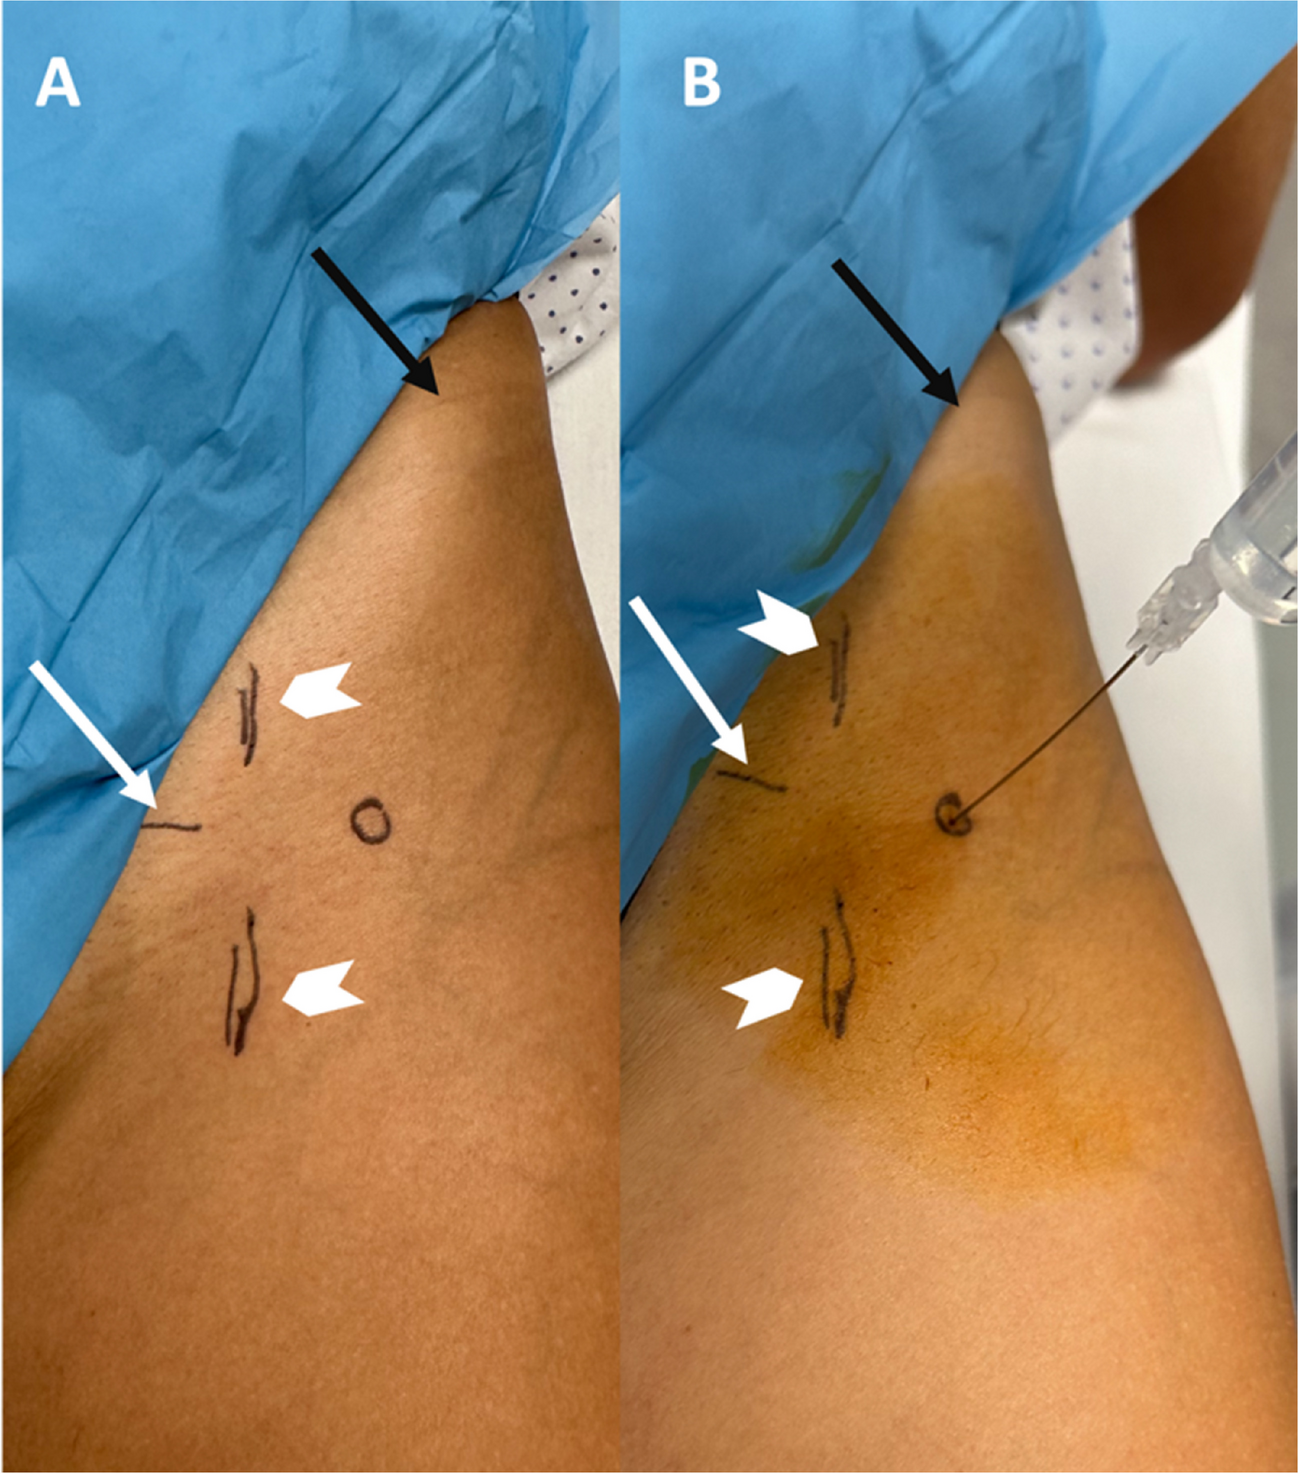 Direct MR arthrography of the hip joint: anterior approach without imaging guidance